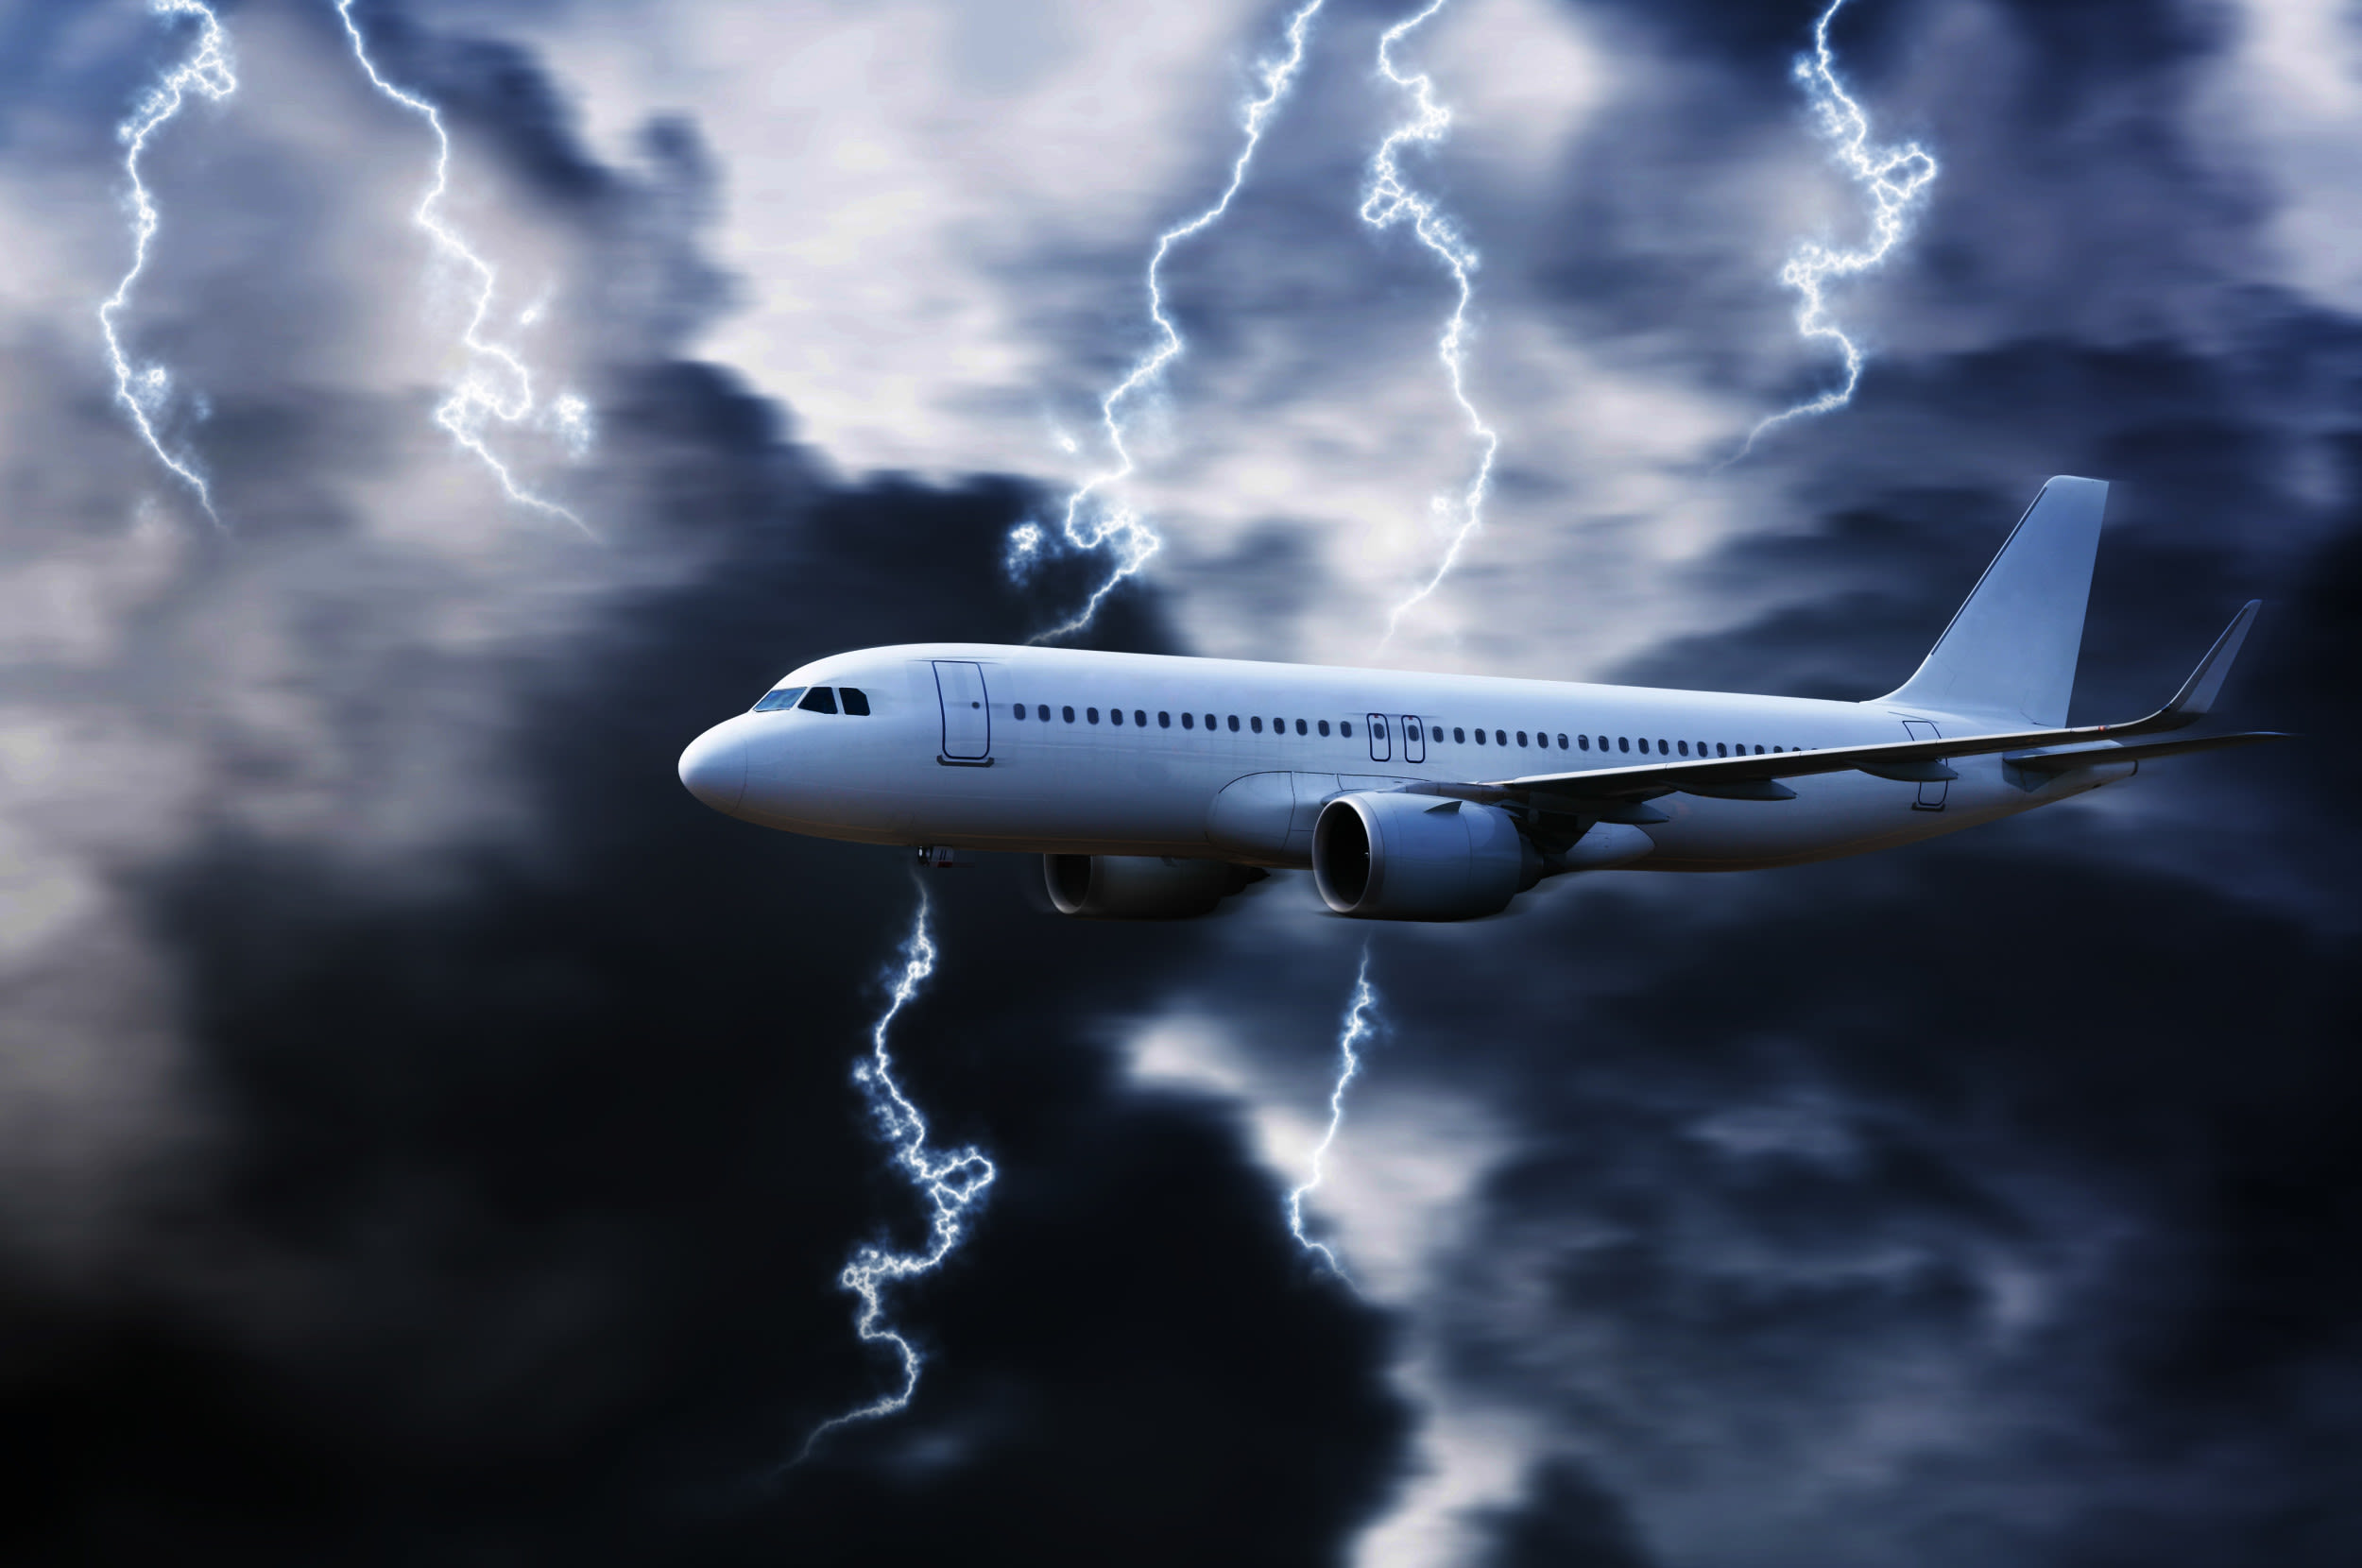 Pilot reveals areas of world where you can expect "the worst turbulence"